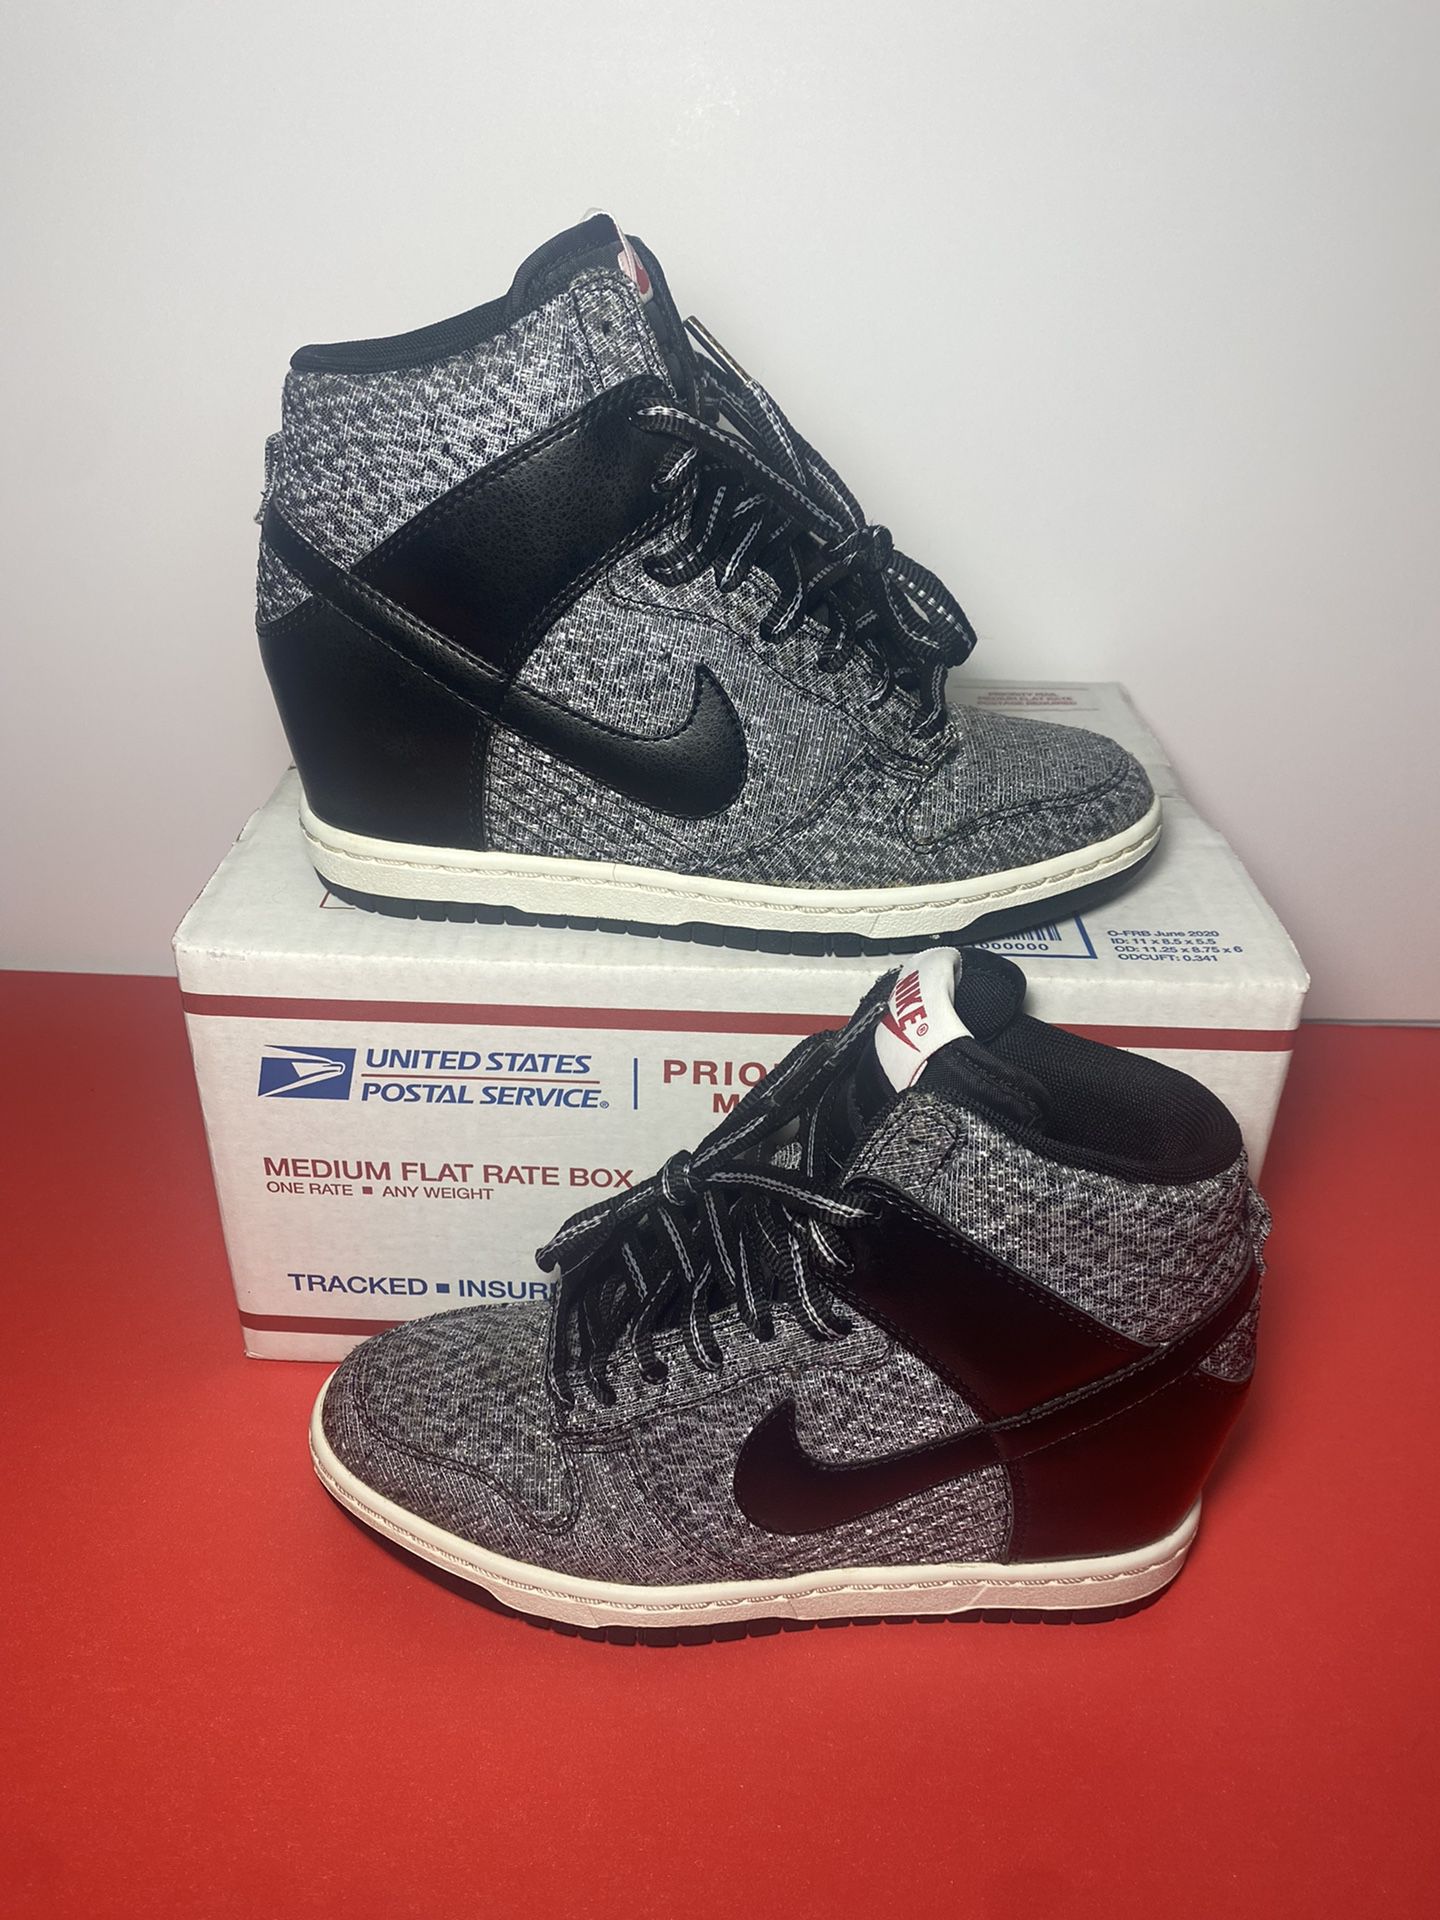 Nike Dunk Sky Wedge Heel Sneaker Black White High Womens US 6 for Sale New York, NY - OfferUp